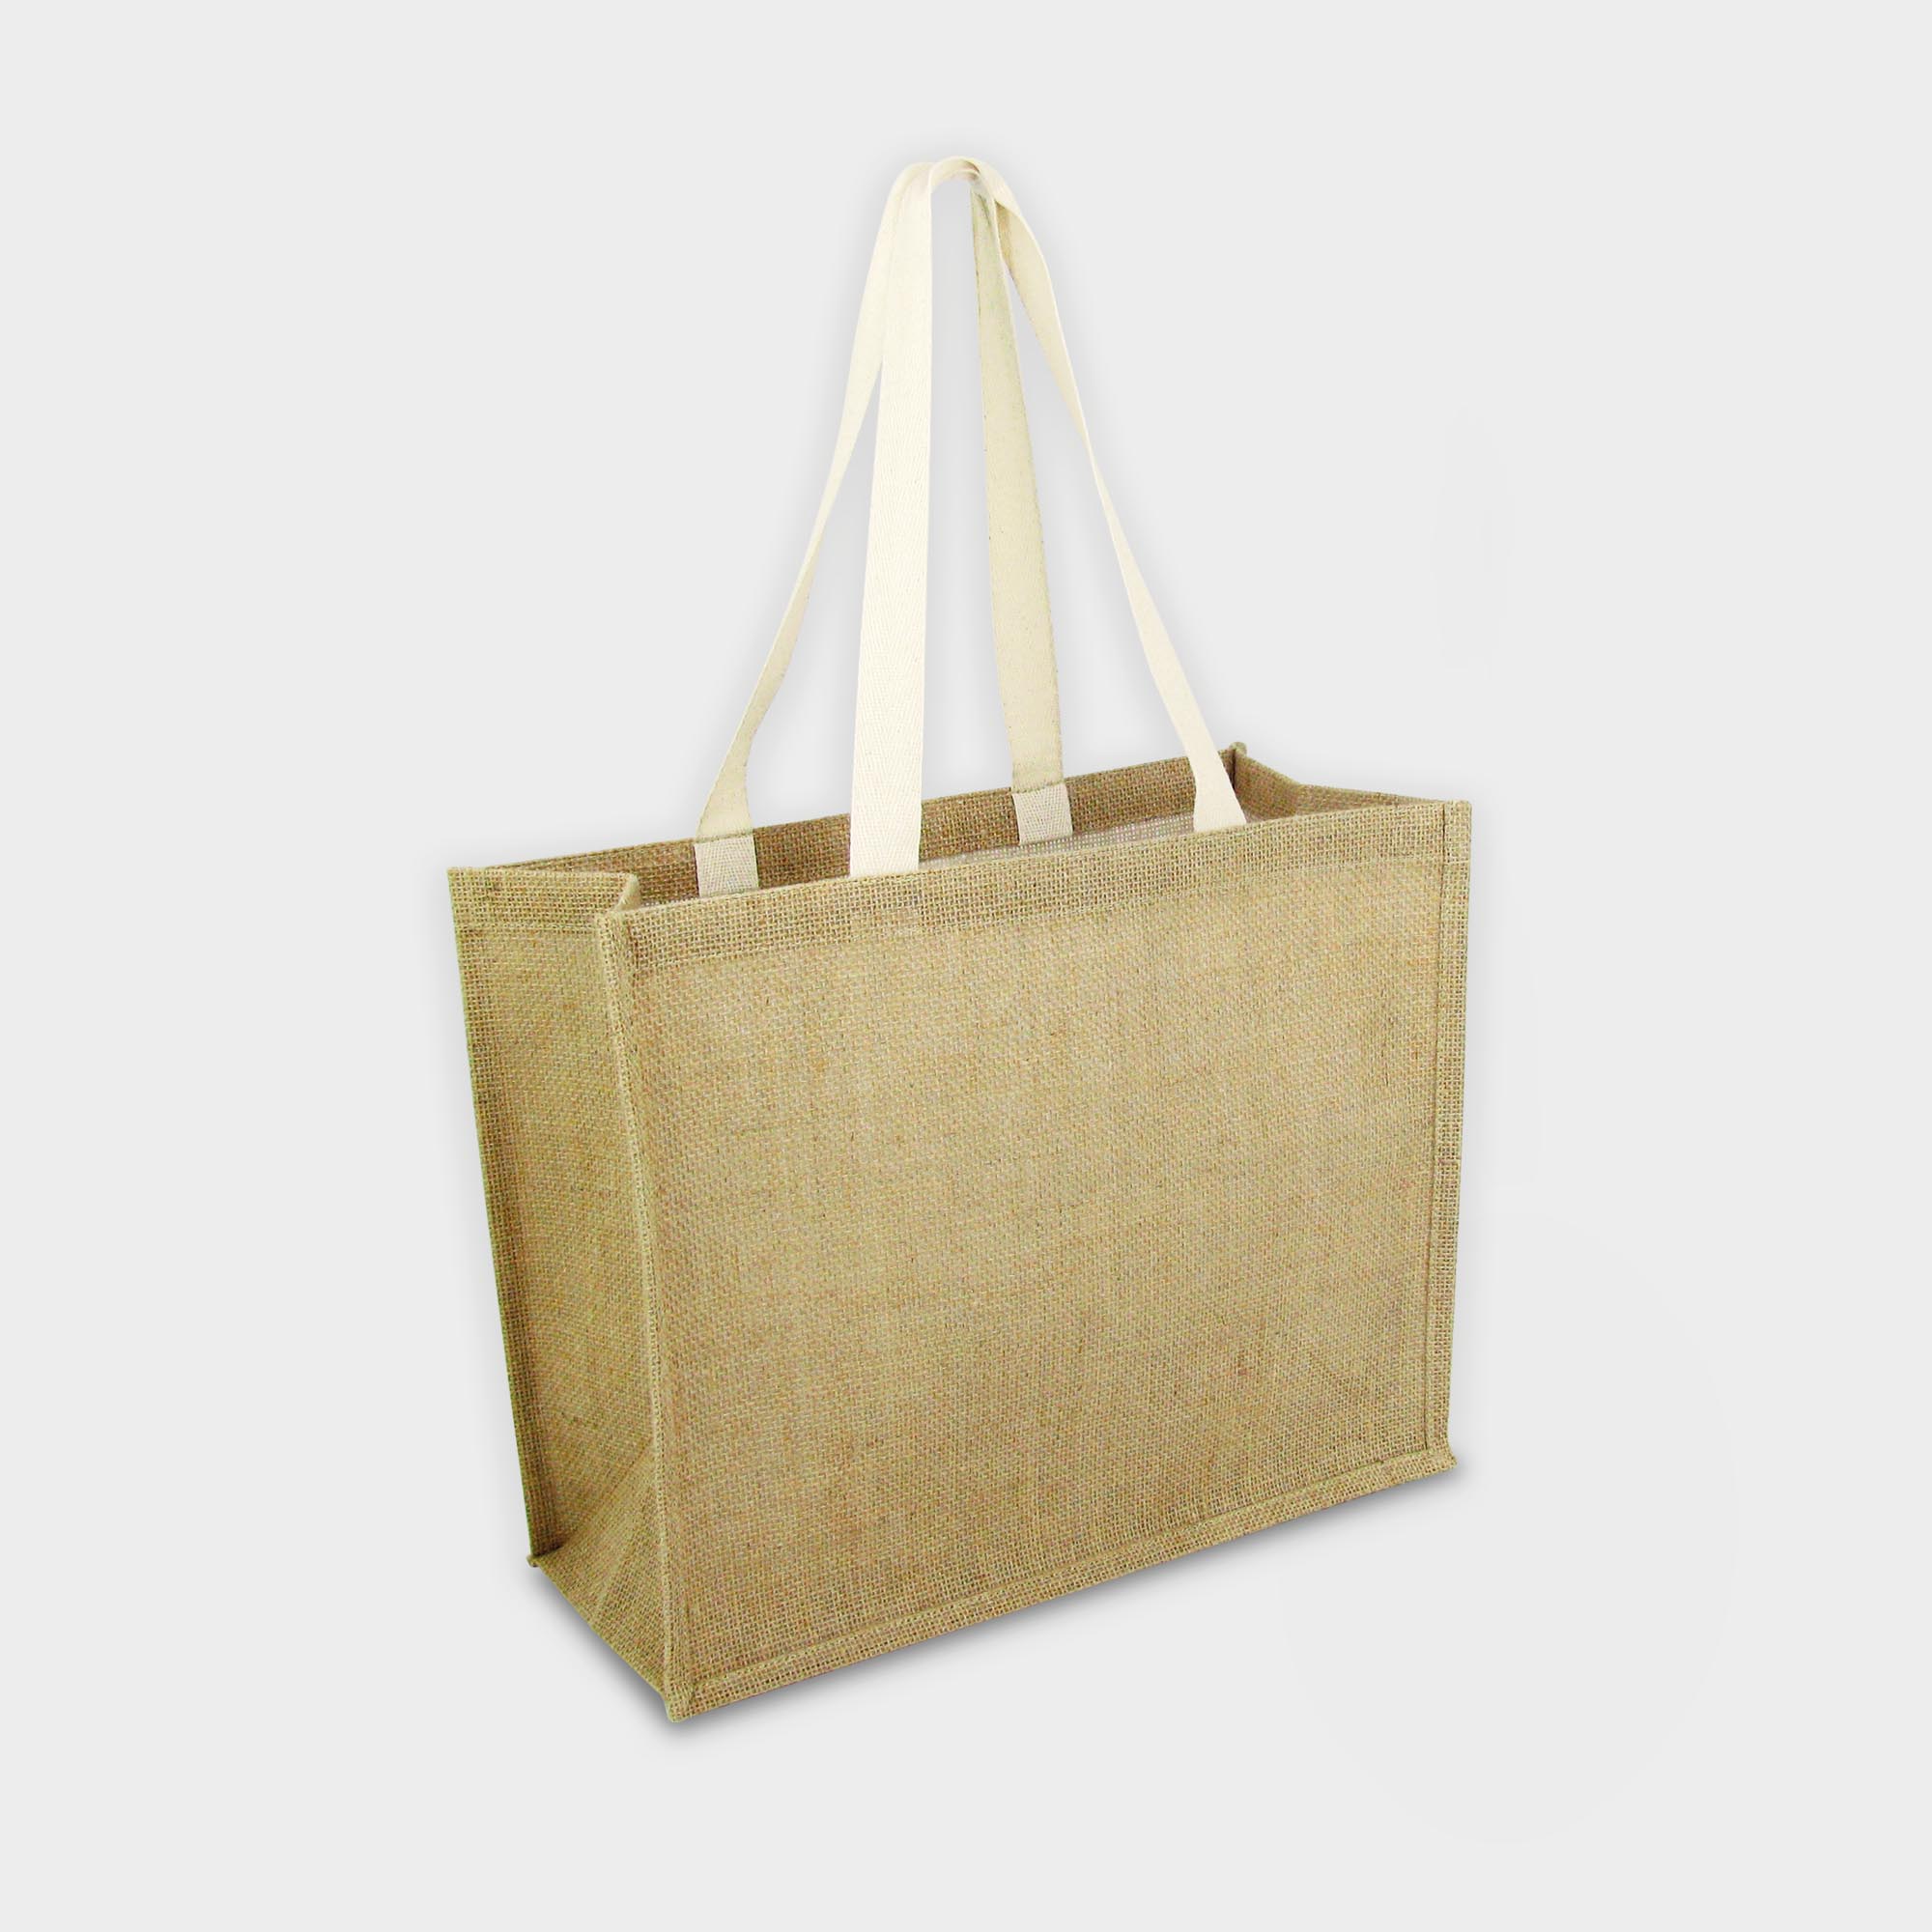 The Green & Good Taunton Shopper is made from natural and sustainable jute. It comes with soft cotton shoulder handles and is lined with a laminated surface for easy cleaning and sturdiness. Ethically produced in India in an audited factory.